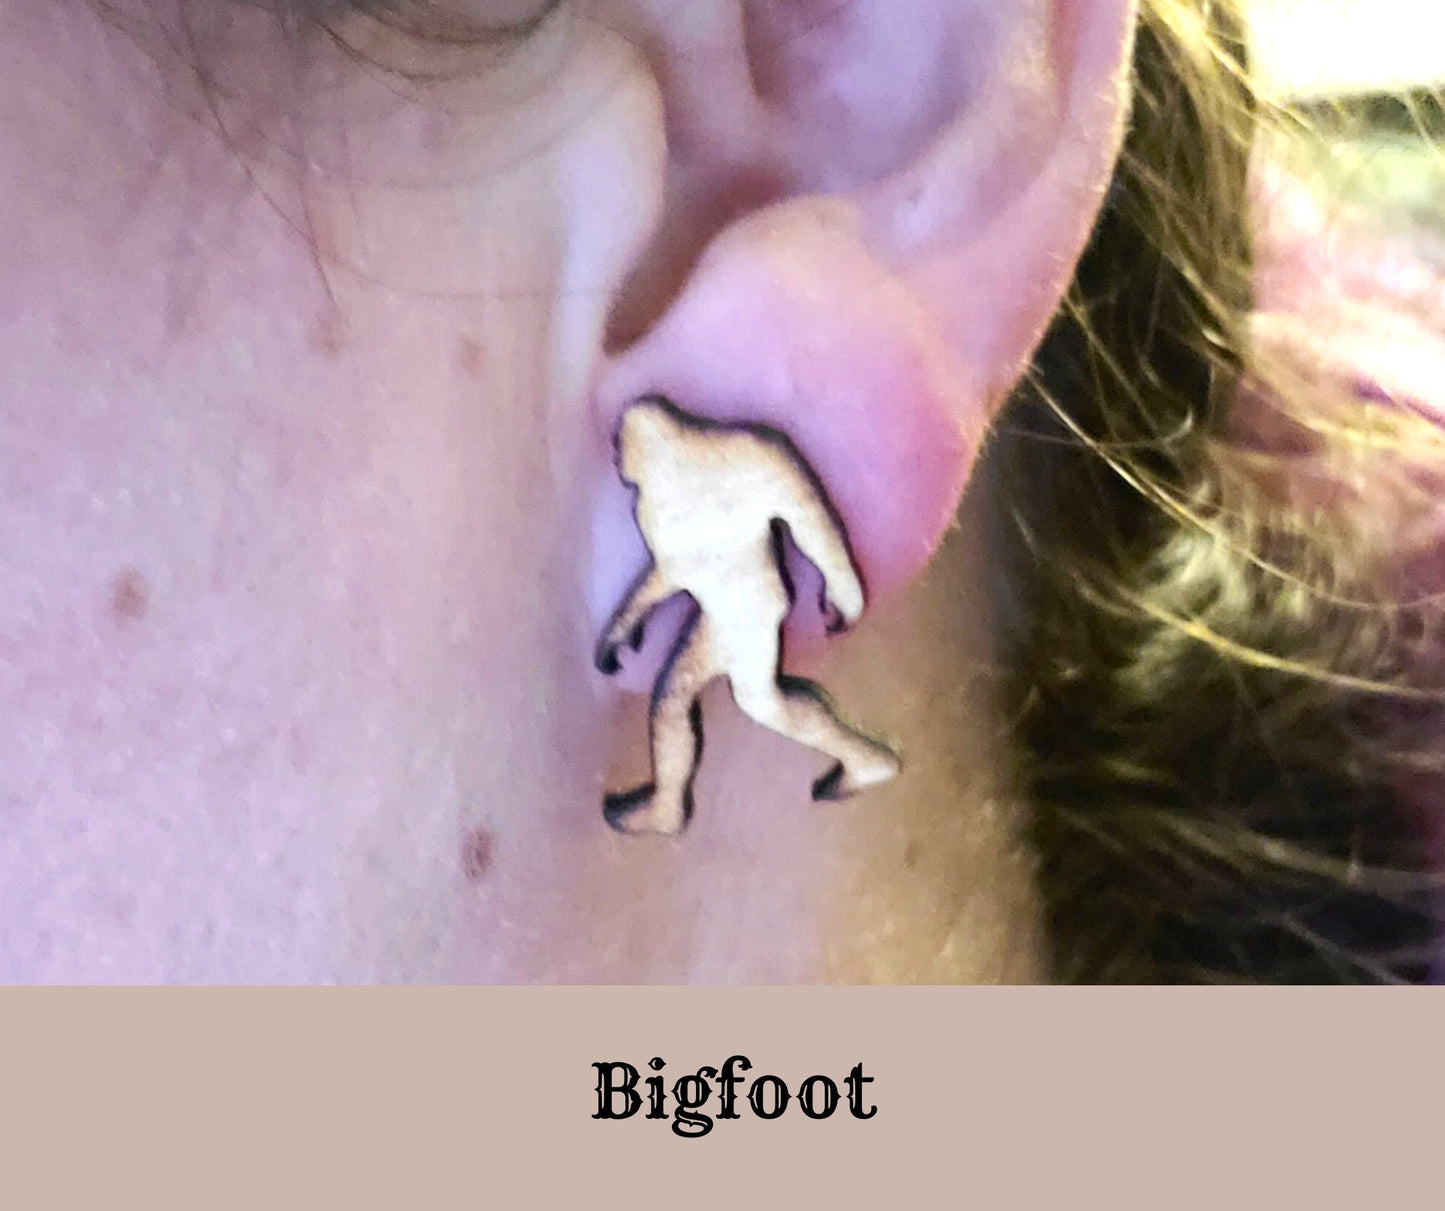 Bigfoot Cryptid Post Stud Earrings Handmade from Pine Wood in Either Plain or Black Lord and Lady Towers